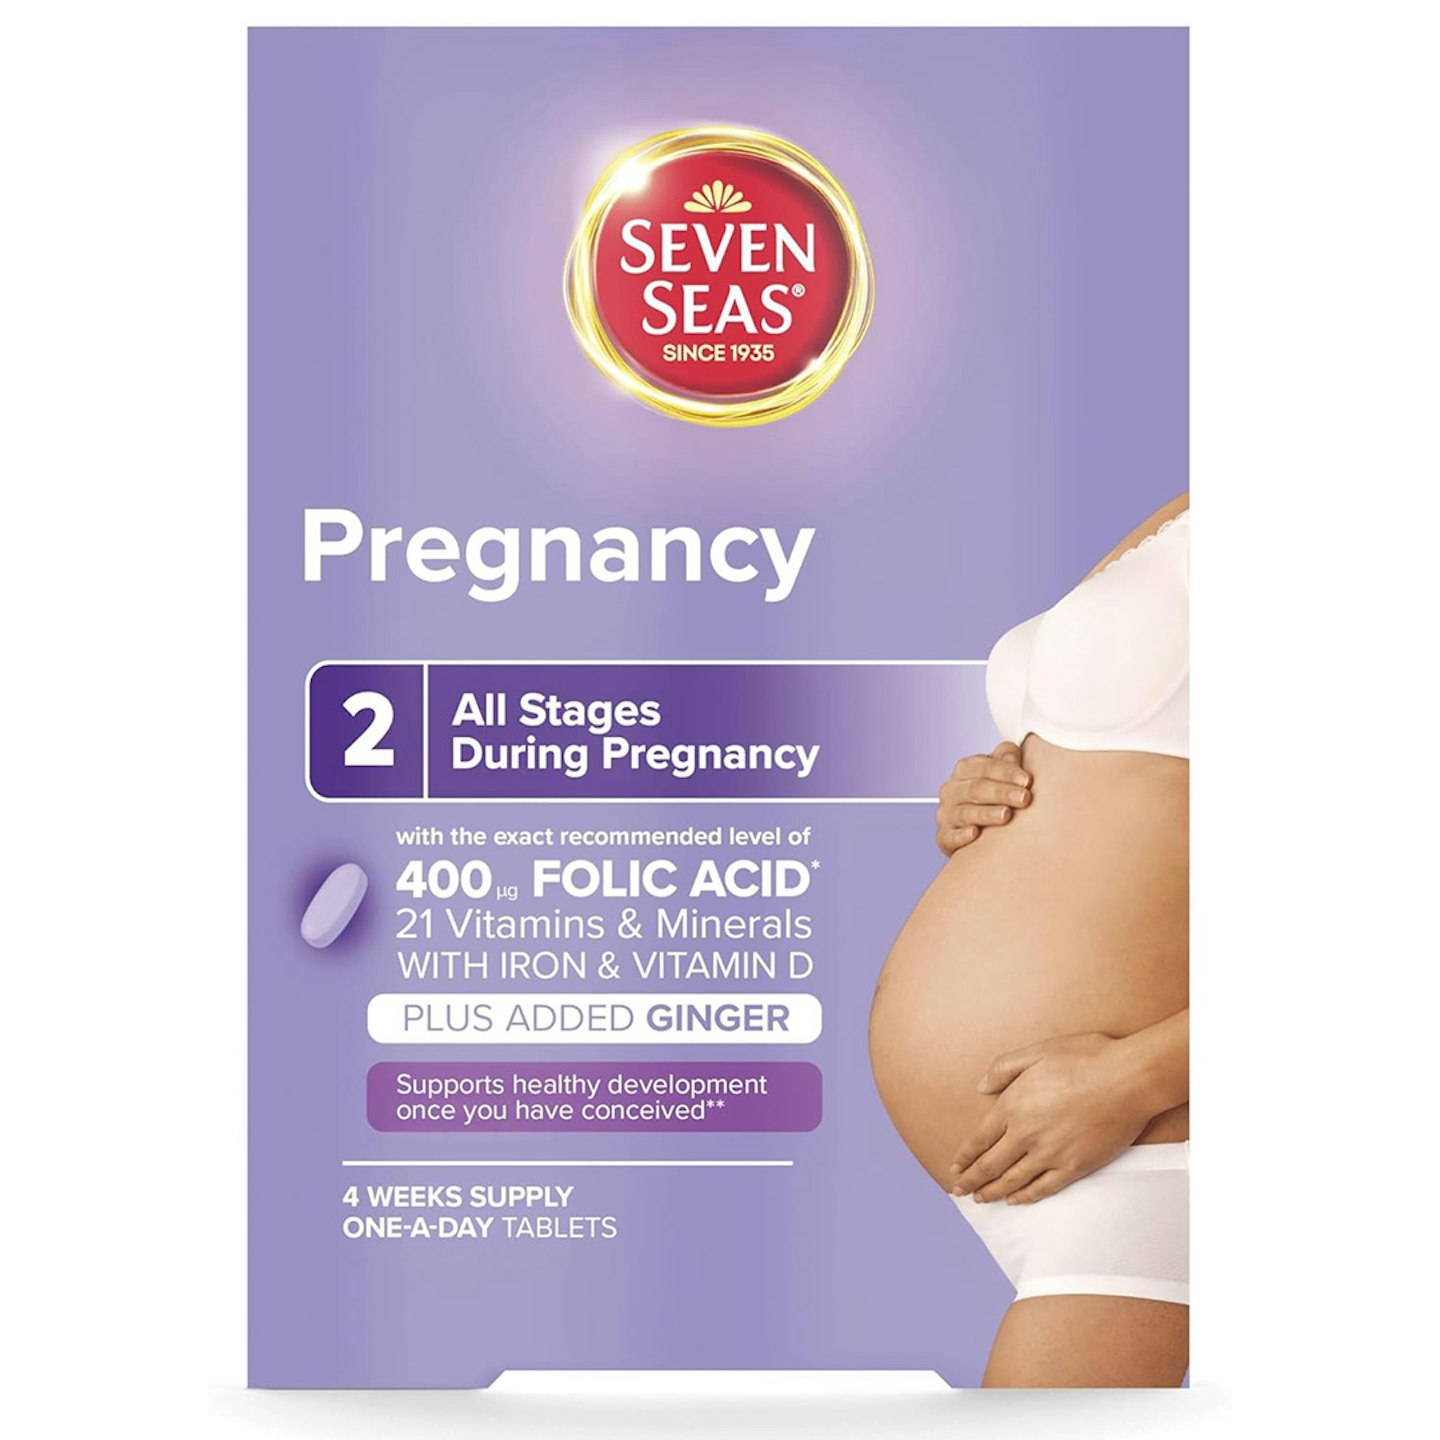 Seven Seas Pregnancy 2 All Stages During Pregnancy 